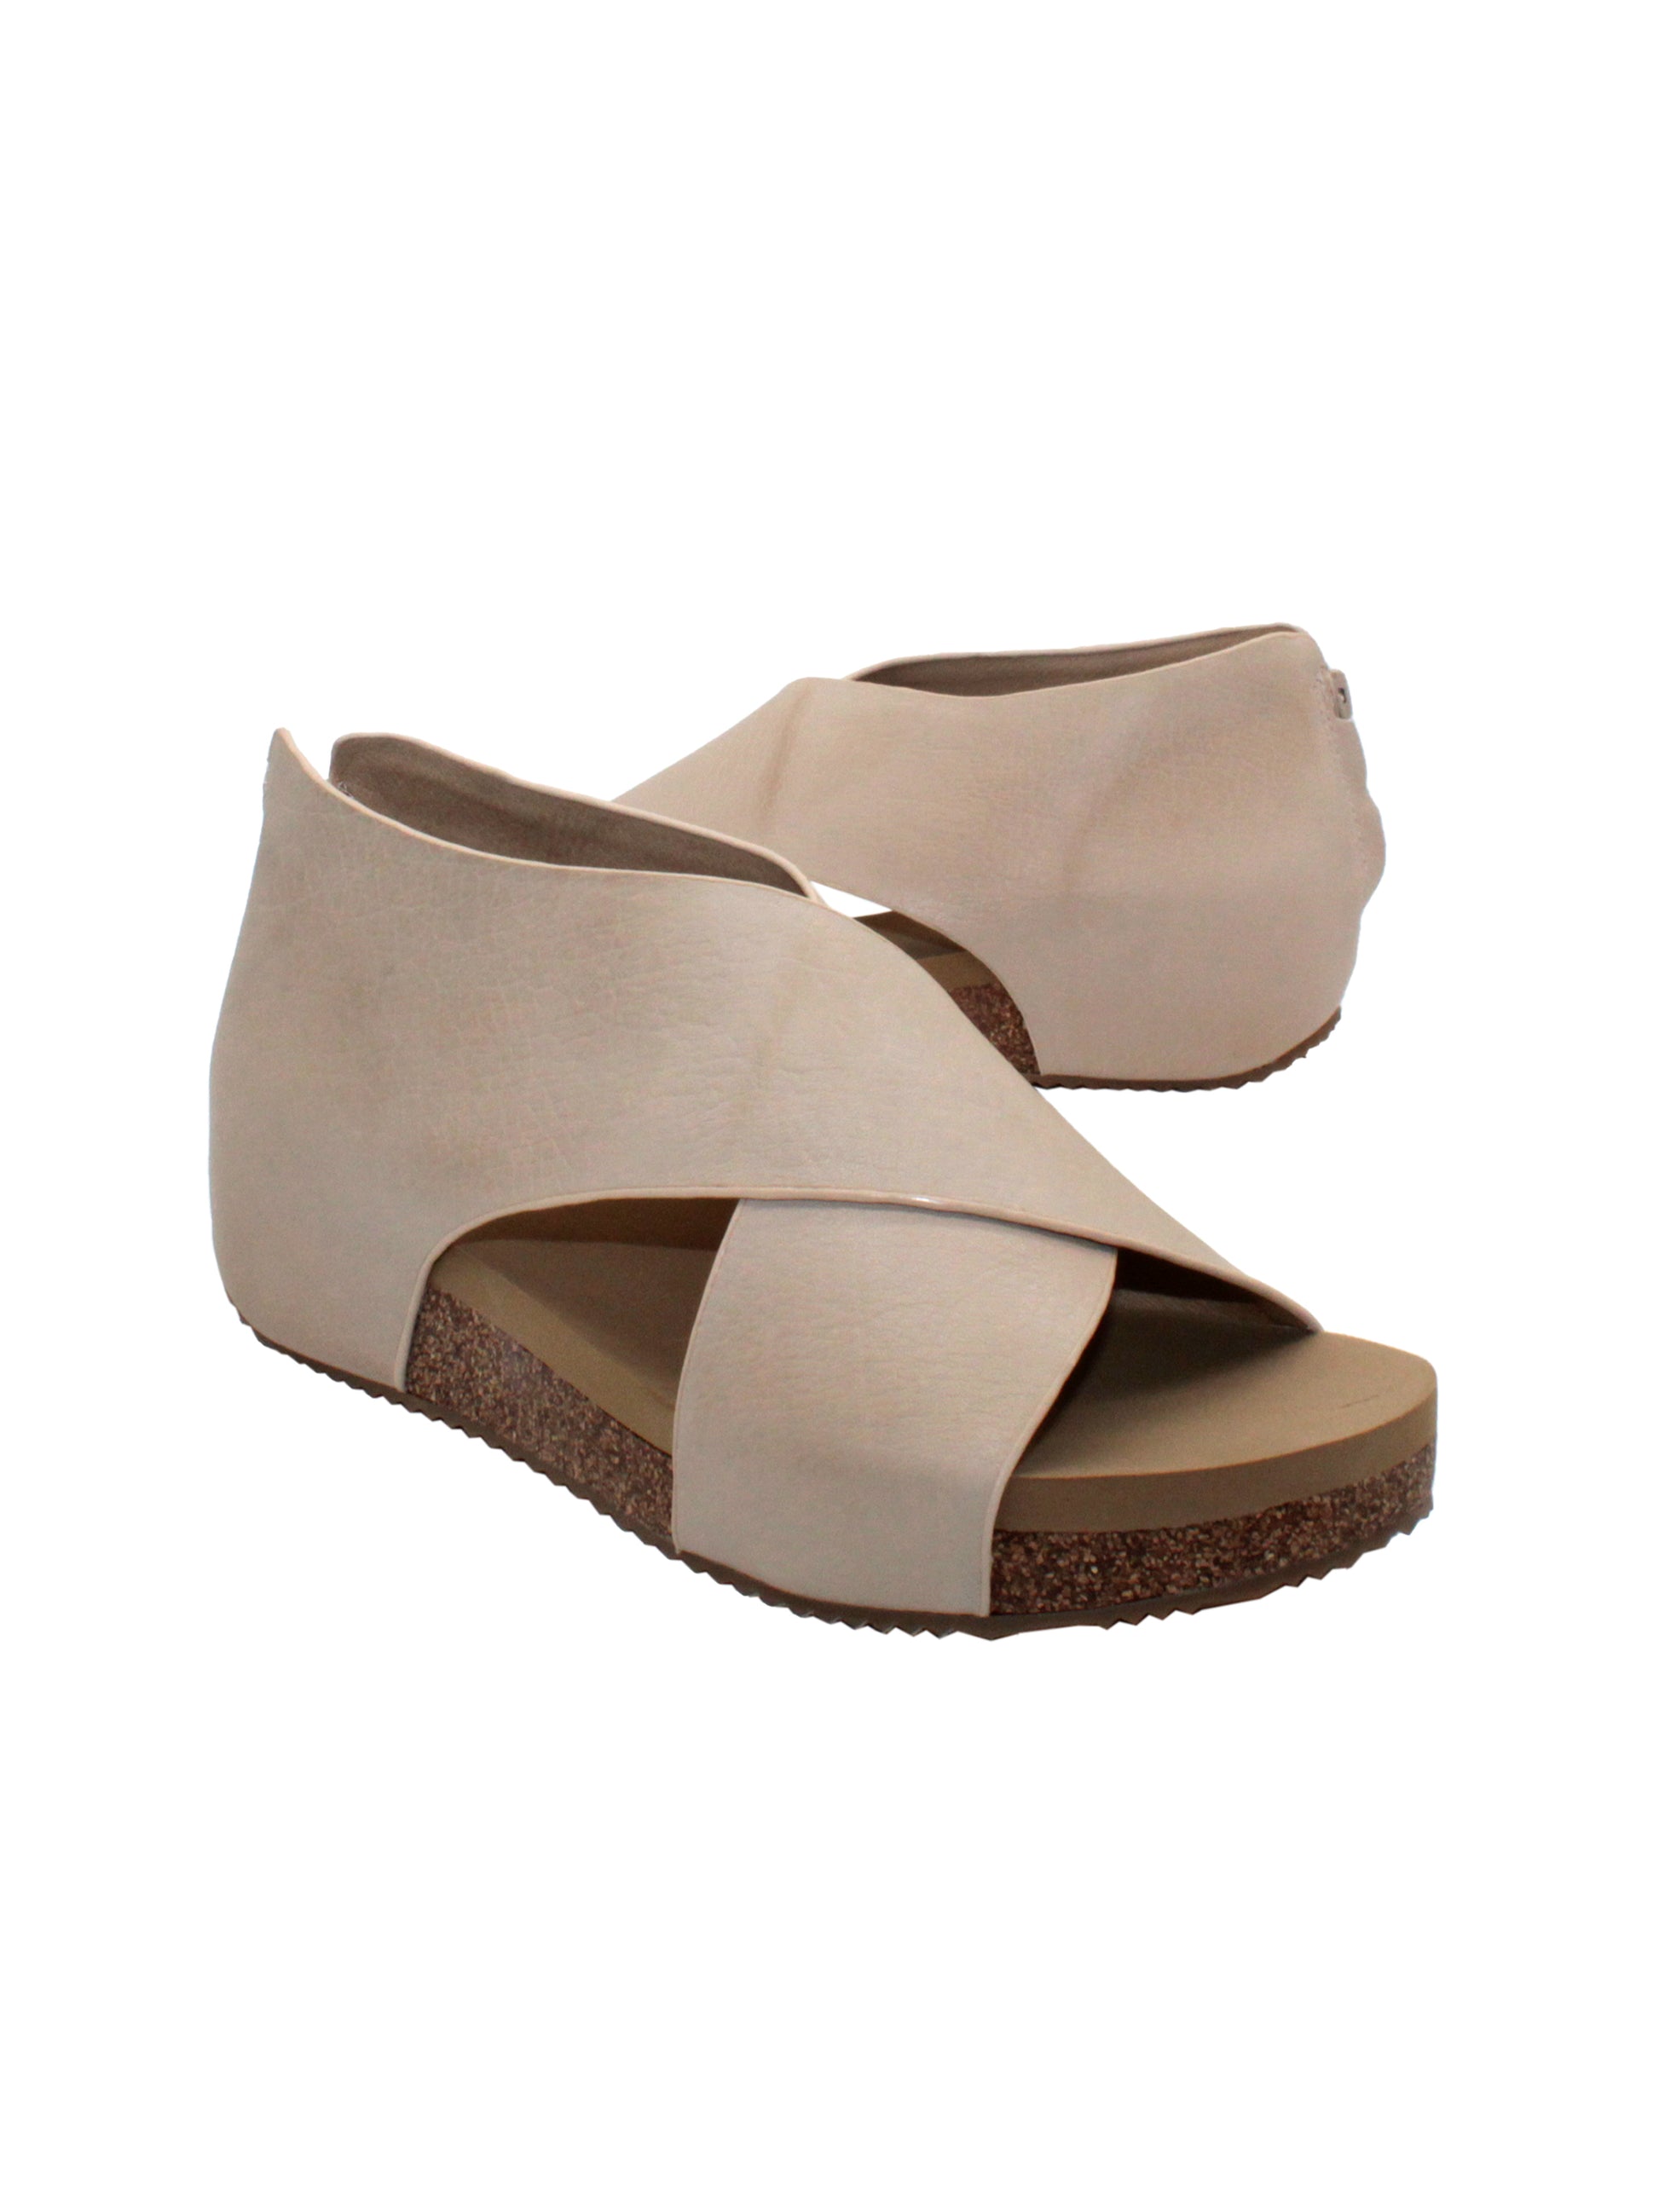 The ‘Alton’ beige sandals by Volatile are made from plush genuine suede and designed with crisscross straps that meet in the back for a closed-but-open effect suitable for year-round styling. Featuring Volatile’s signature ultra-comfort EVA insole stationed on a modest low wedge, and durable, non-skid rubber traction soles, these are ideal for all day walking.